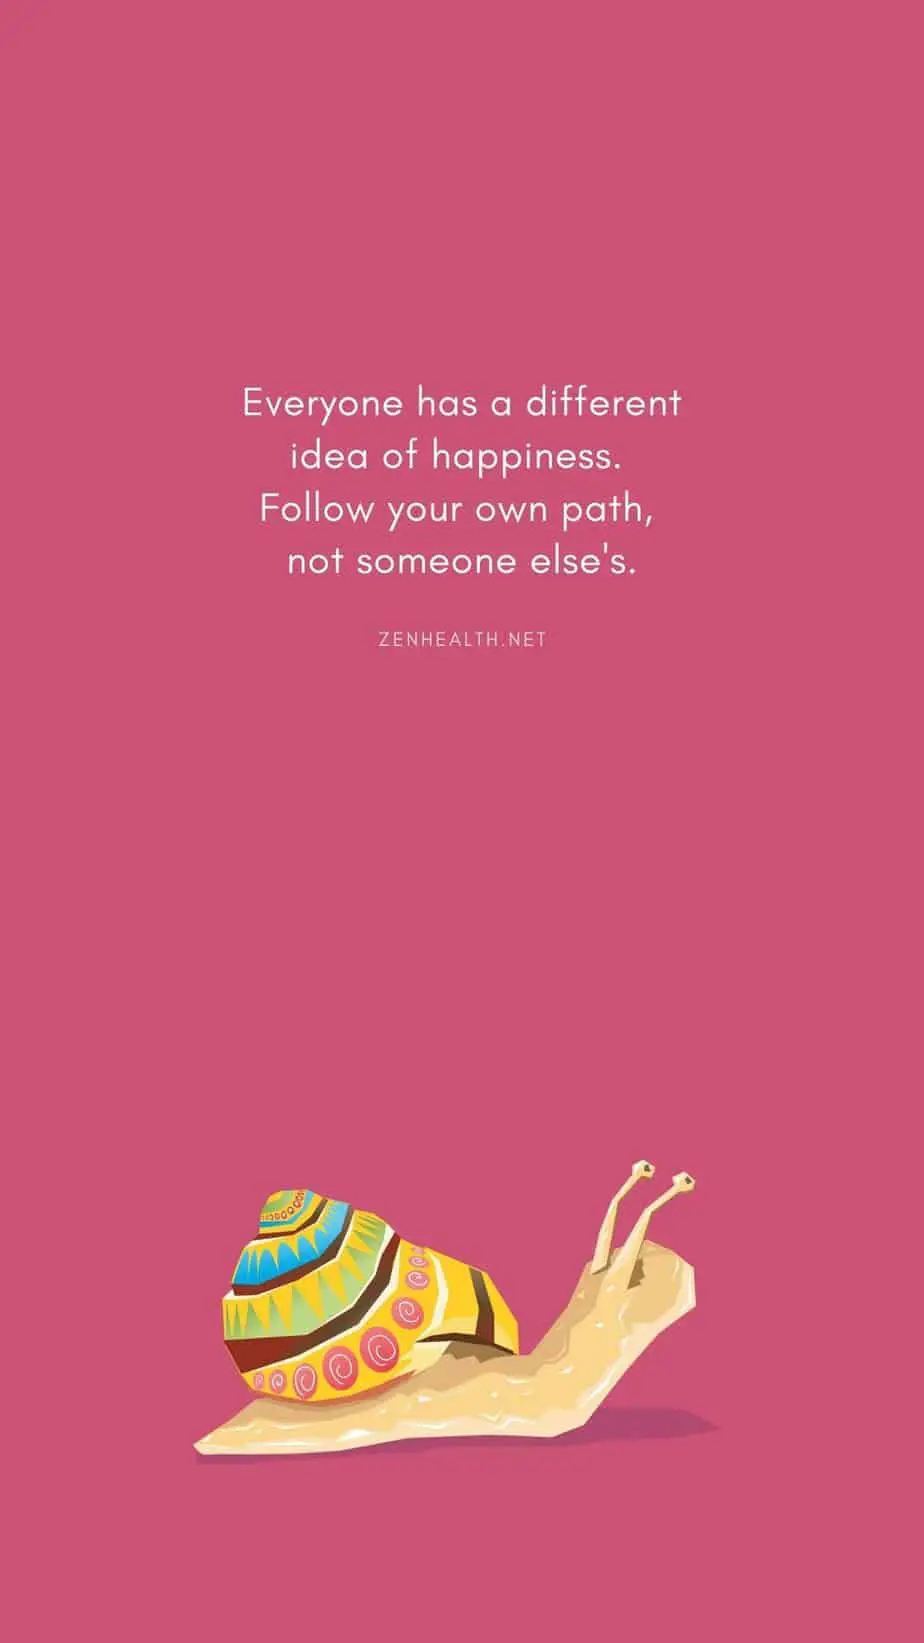 Everyone has a different idea of happiness. Follow your own path, not someone else's.